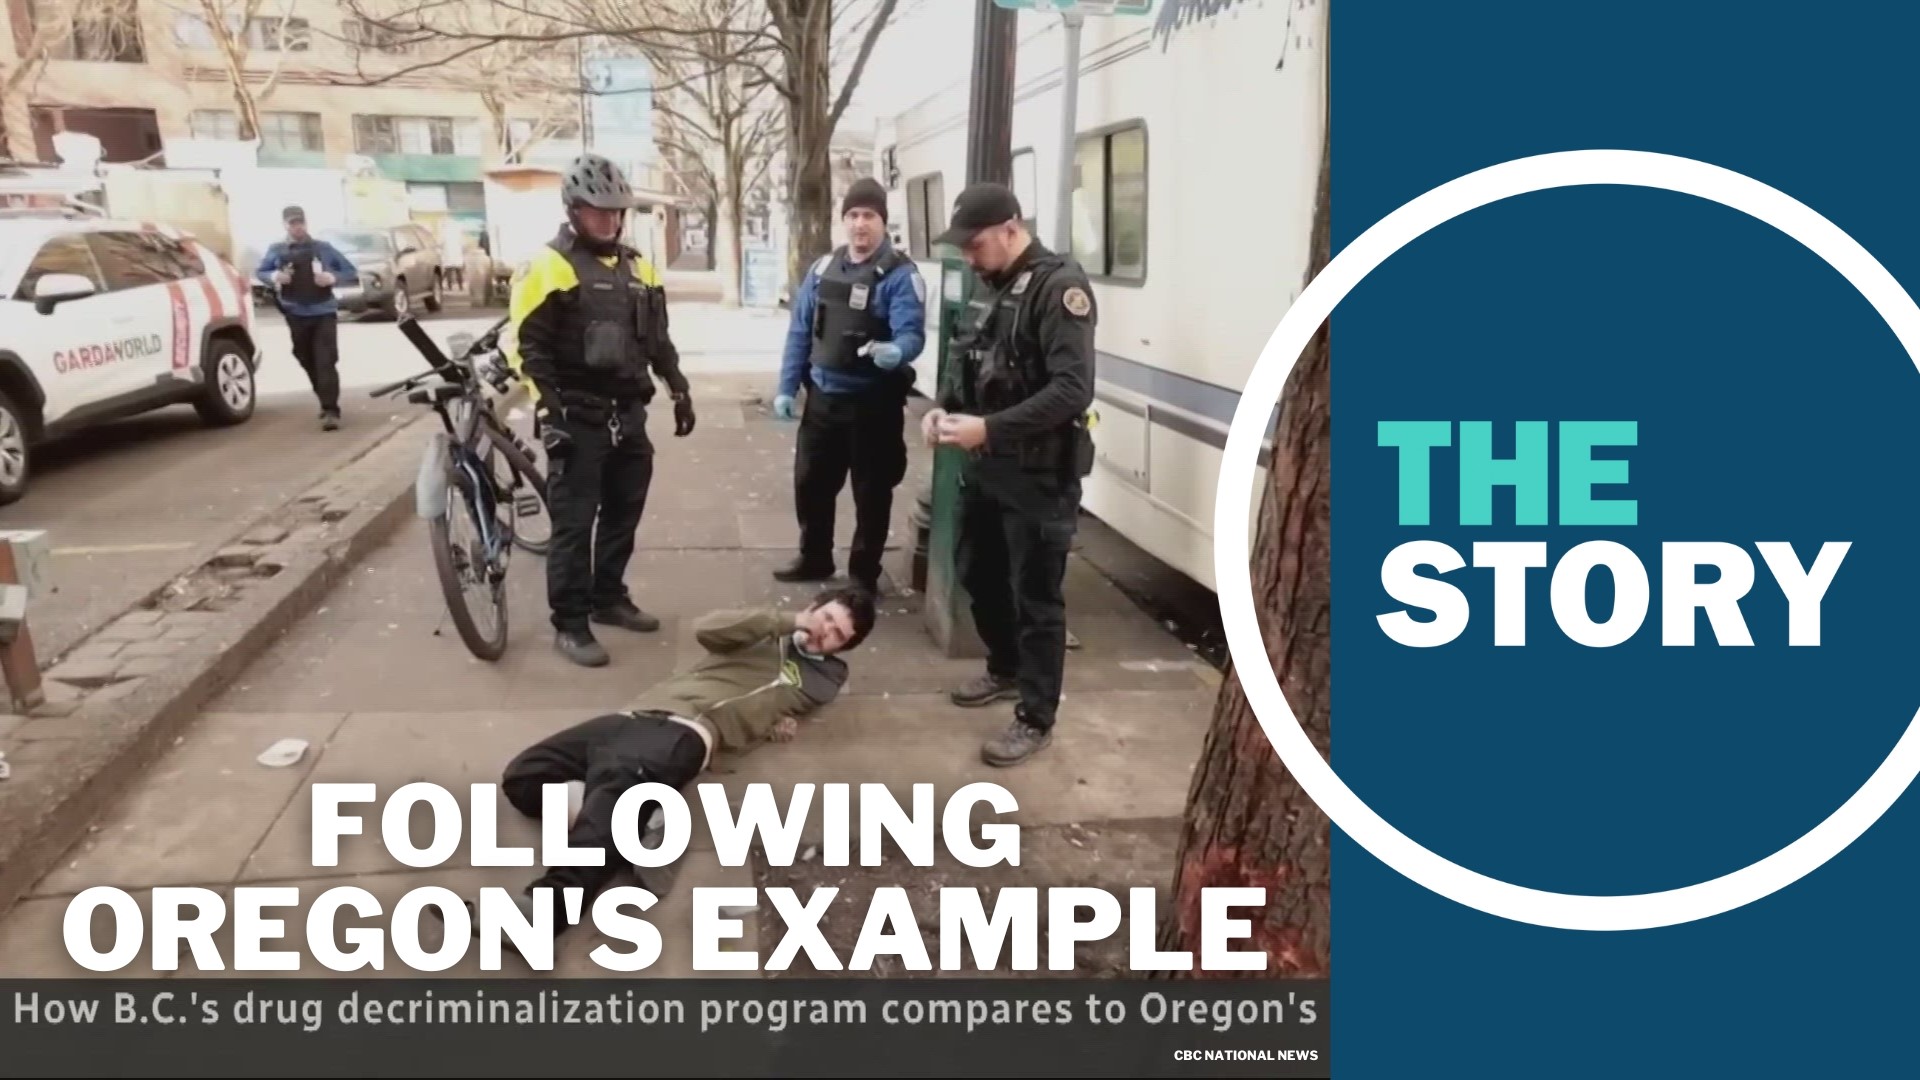 Journalists from Vancouver, B.C. spent some time on the streets of Portland earlier this year. They were gauging the after-effects of Oregon's Measure 110.